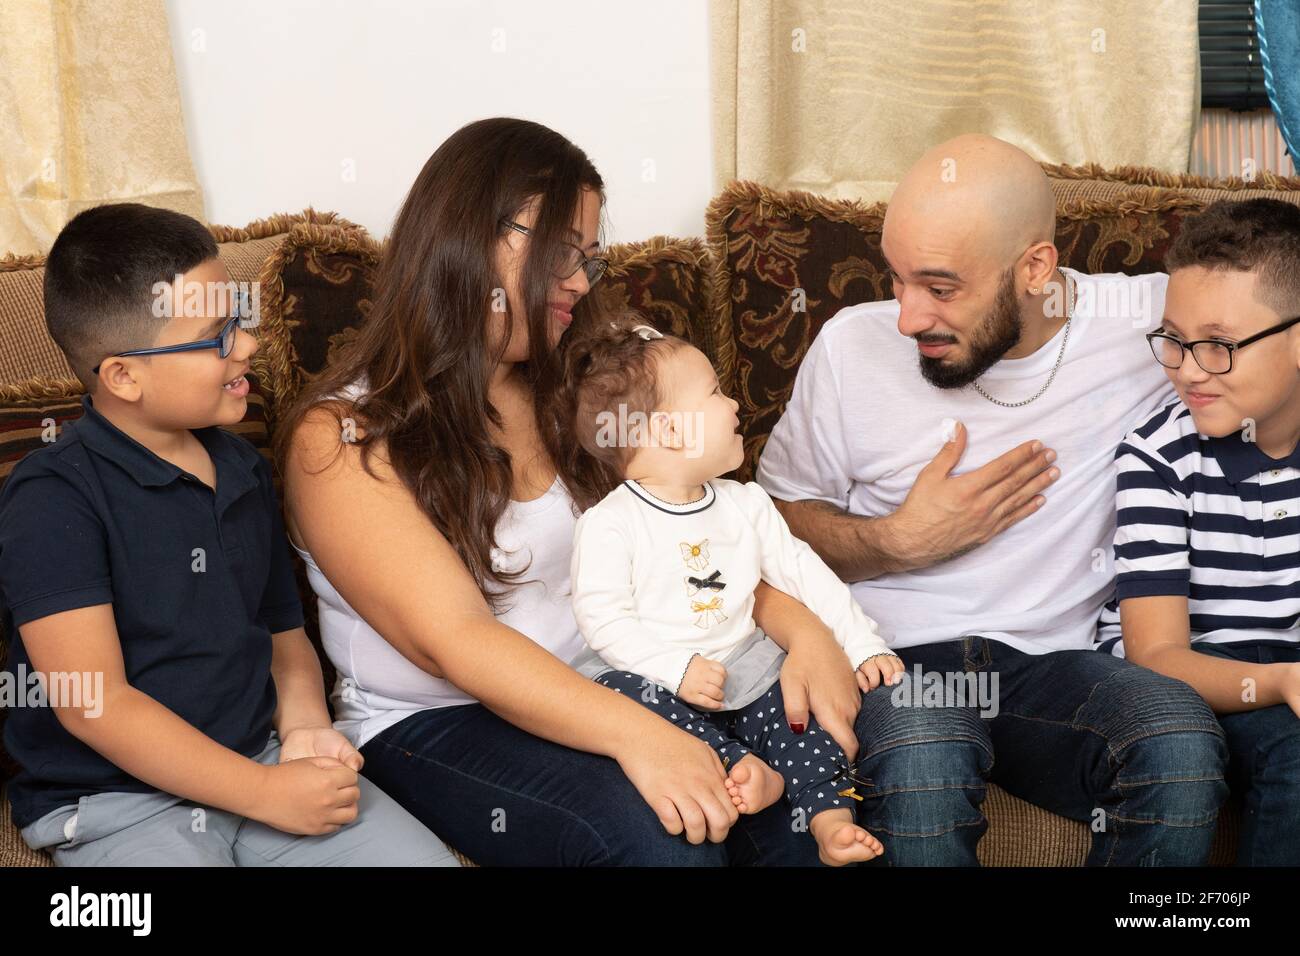 Happy family portrait mother and father in their 30s, sons ages 9 and 7, and infant daughter, age 7 months, father interacting with baby girl, group Stock Photo